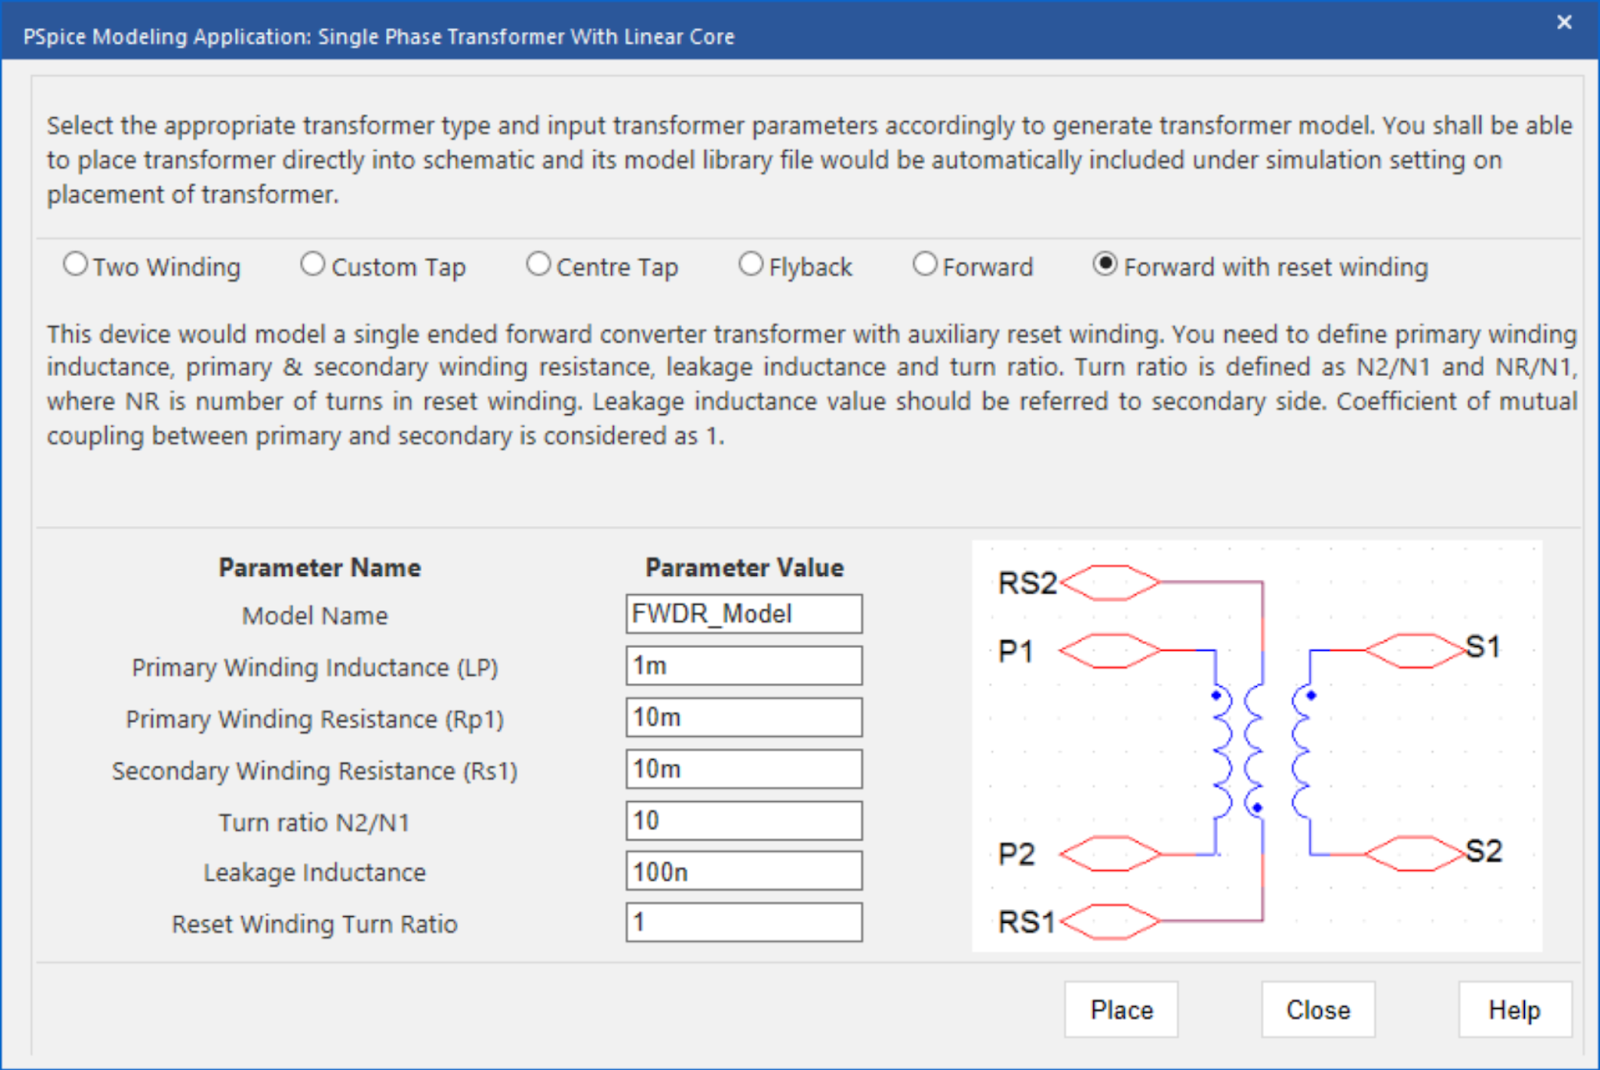 Create a transformer spice model in PSpice with the PSpice modeling application